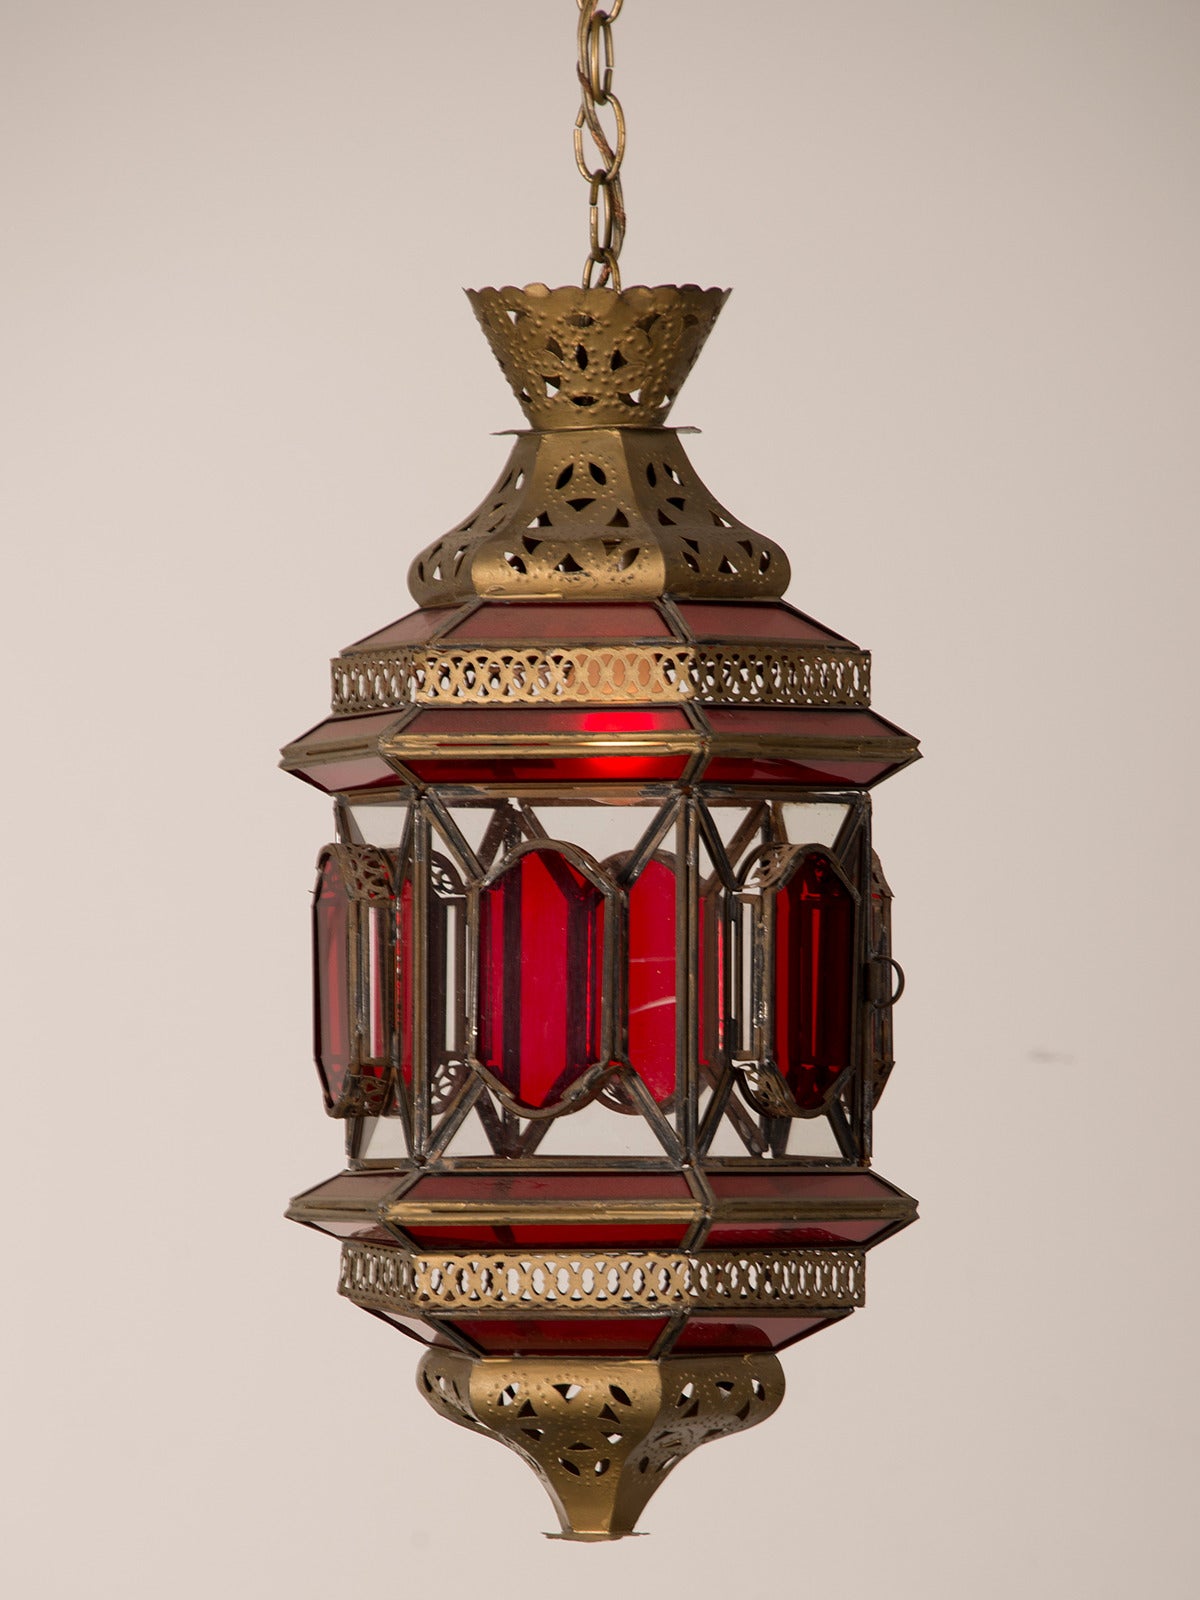 A vintage Moroccan lantern circa 1940 enclosing ruby and clear glass within a framework of pierced and filigreed brass. This lantern has a hexagonal shape and the interplay between the coloured glass and the textured brass creates a romantic aura of